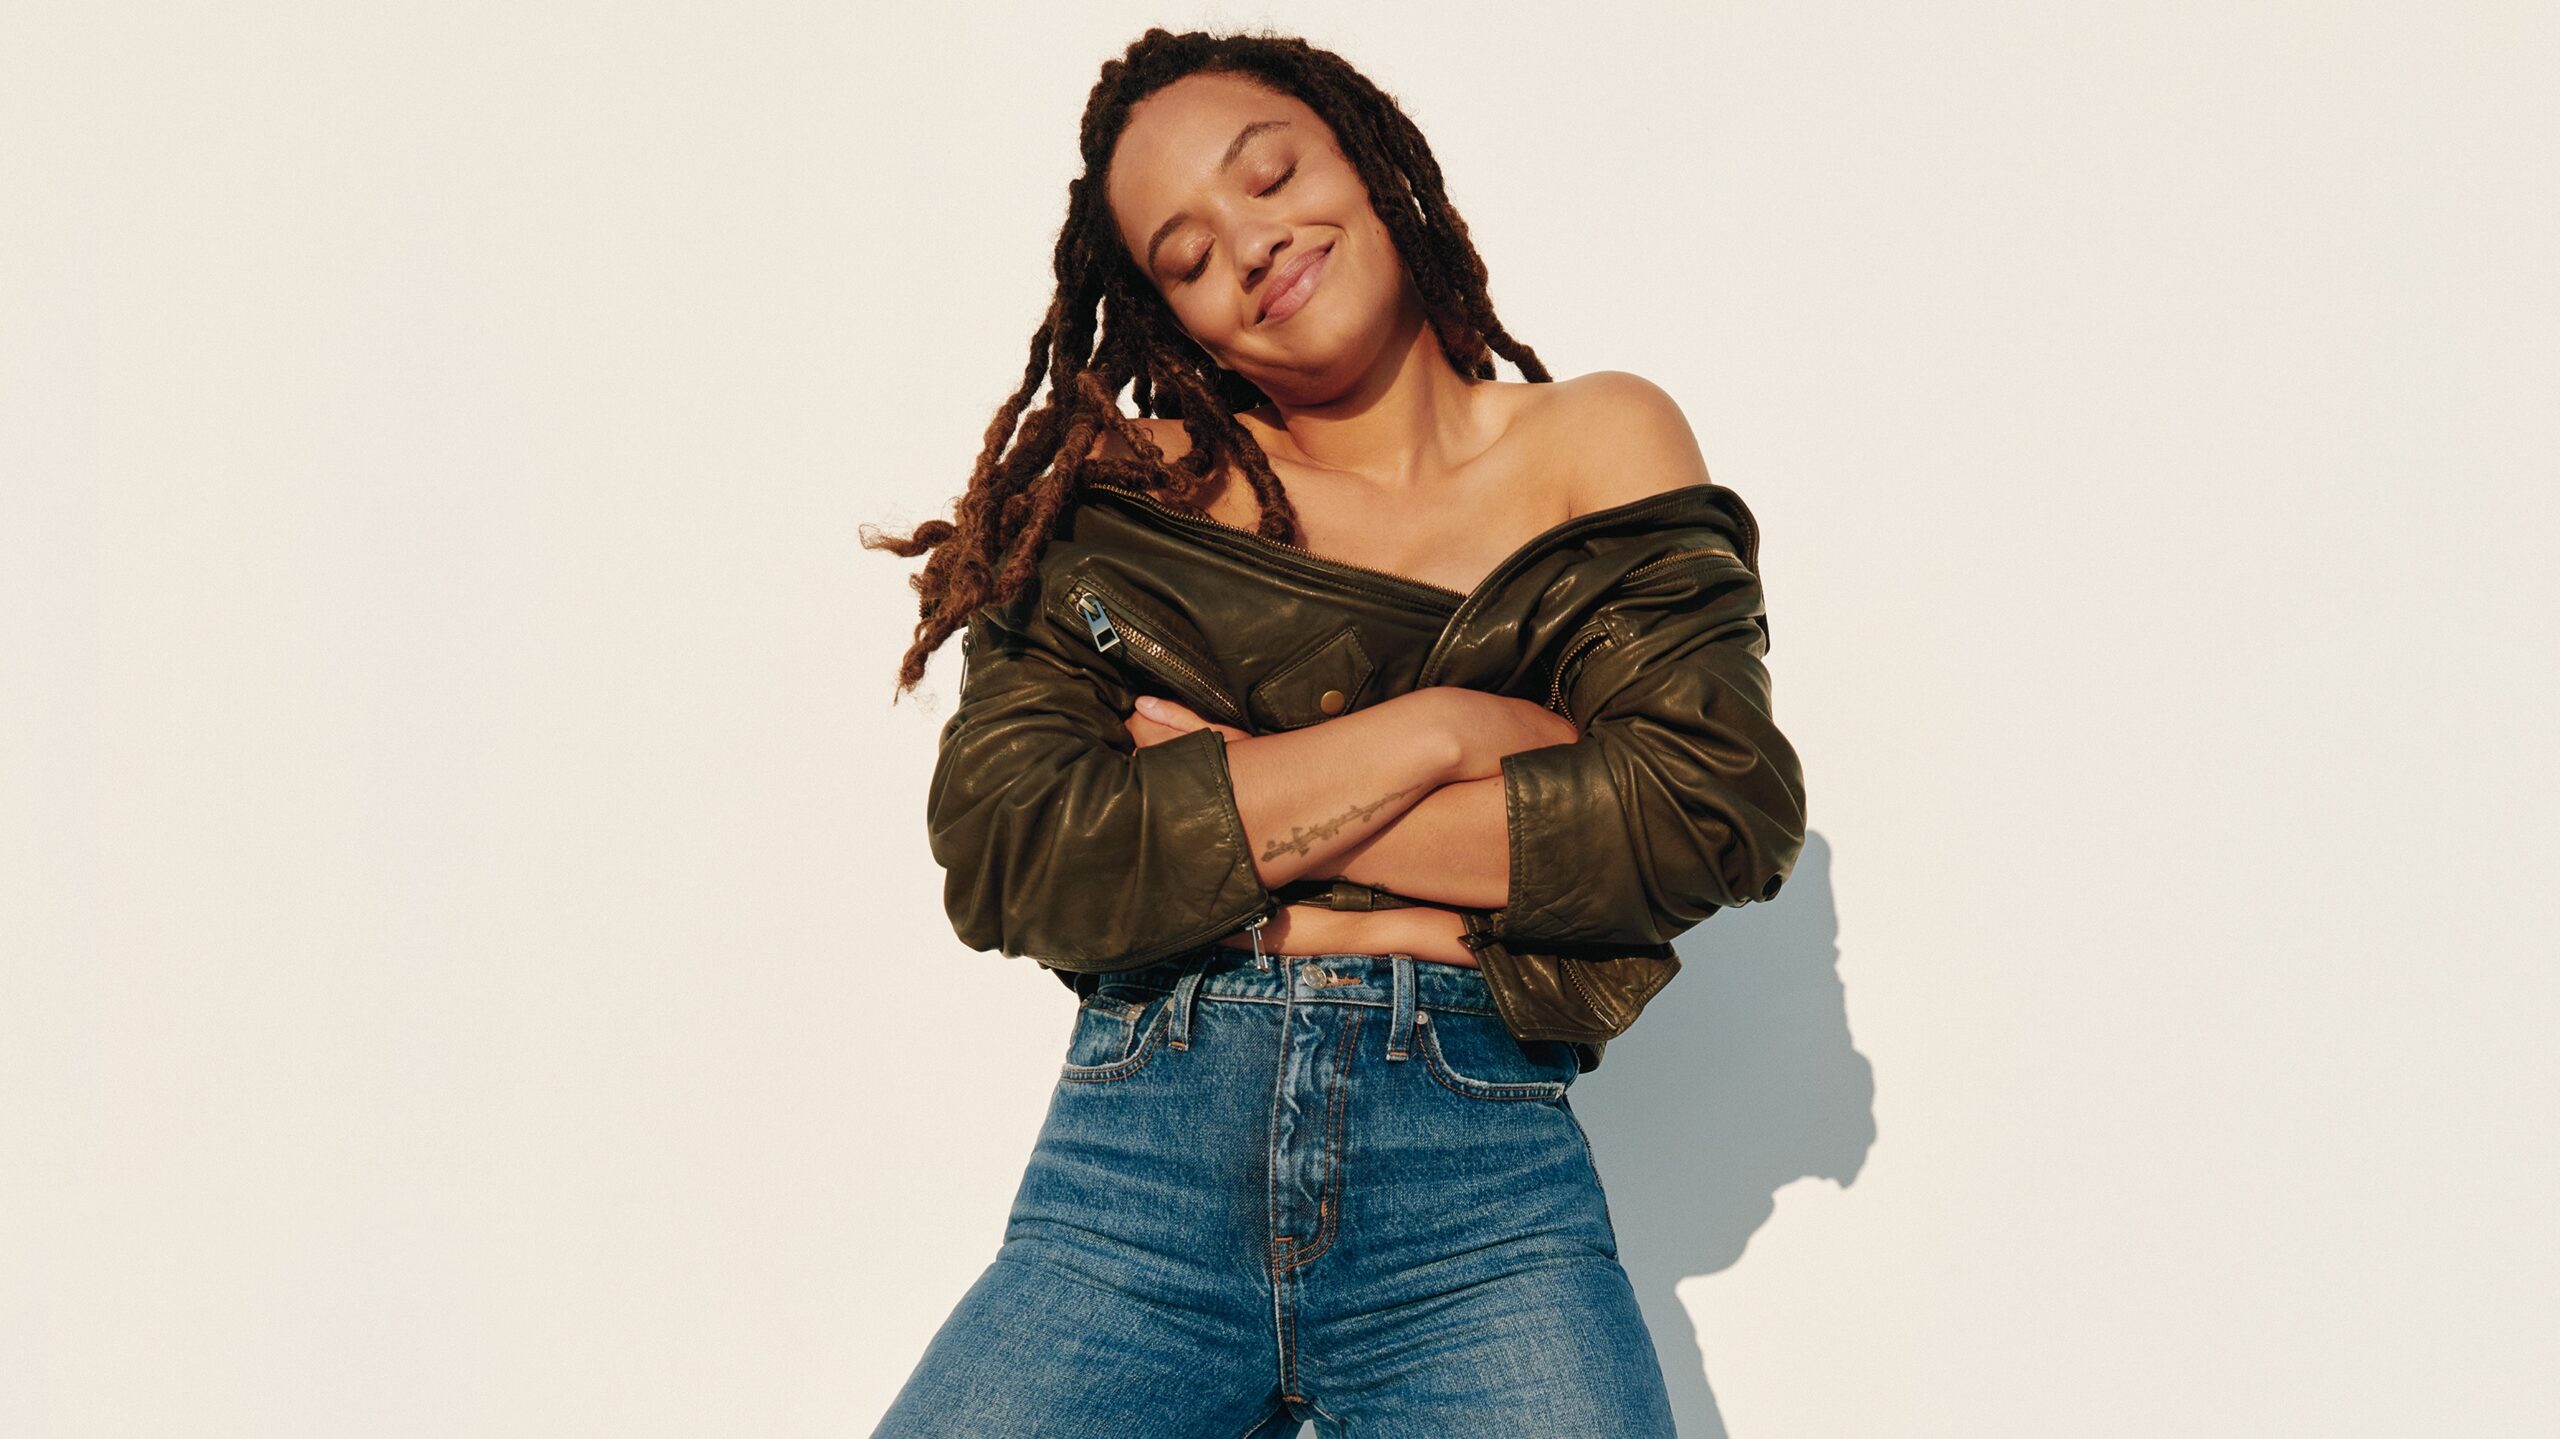 Kiersey Clemons Believes That Fashion Should Bring Out The ‘Best Version Of Yourself’